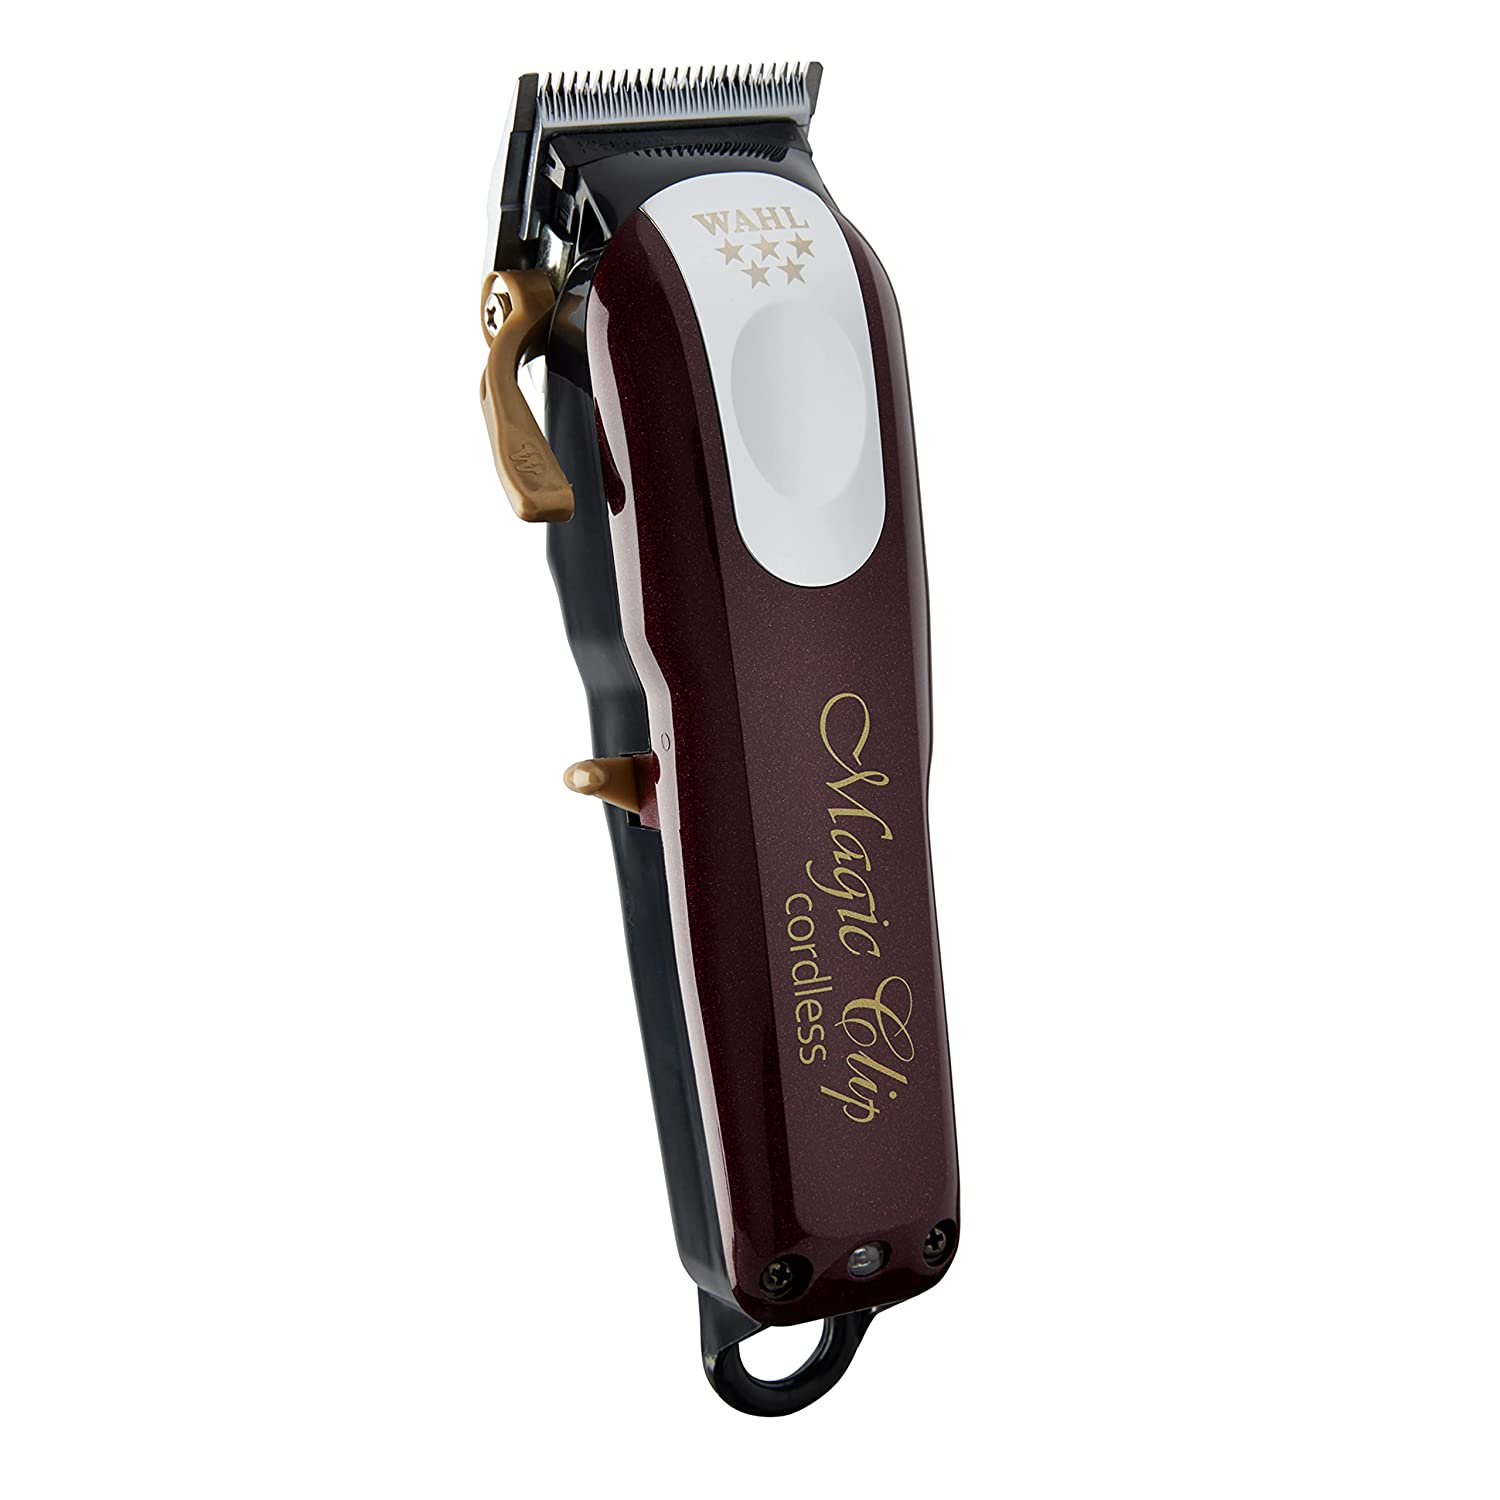 Best Fade clippers